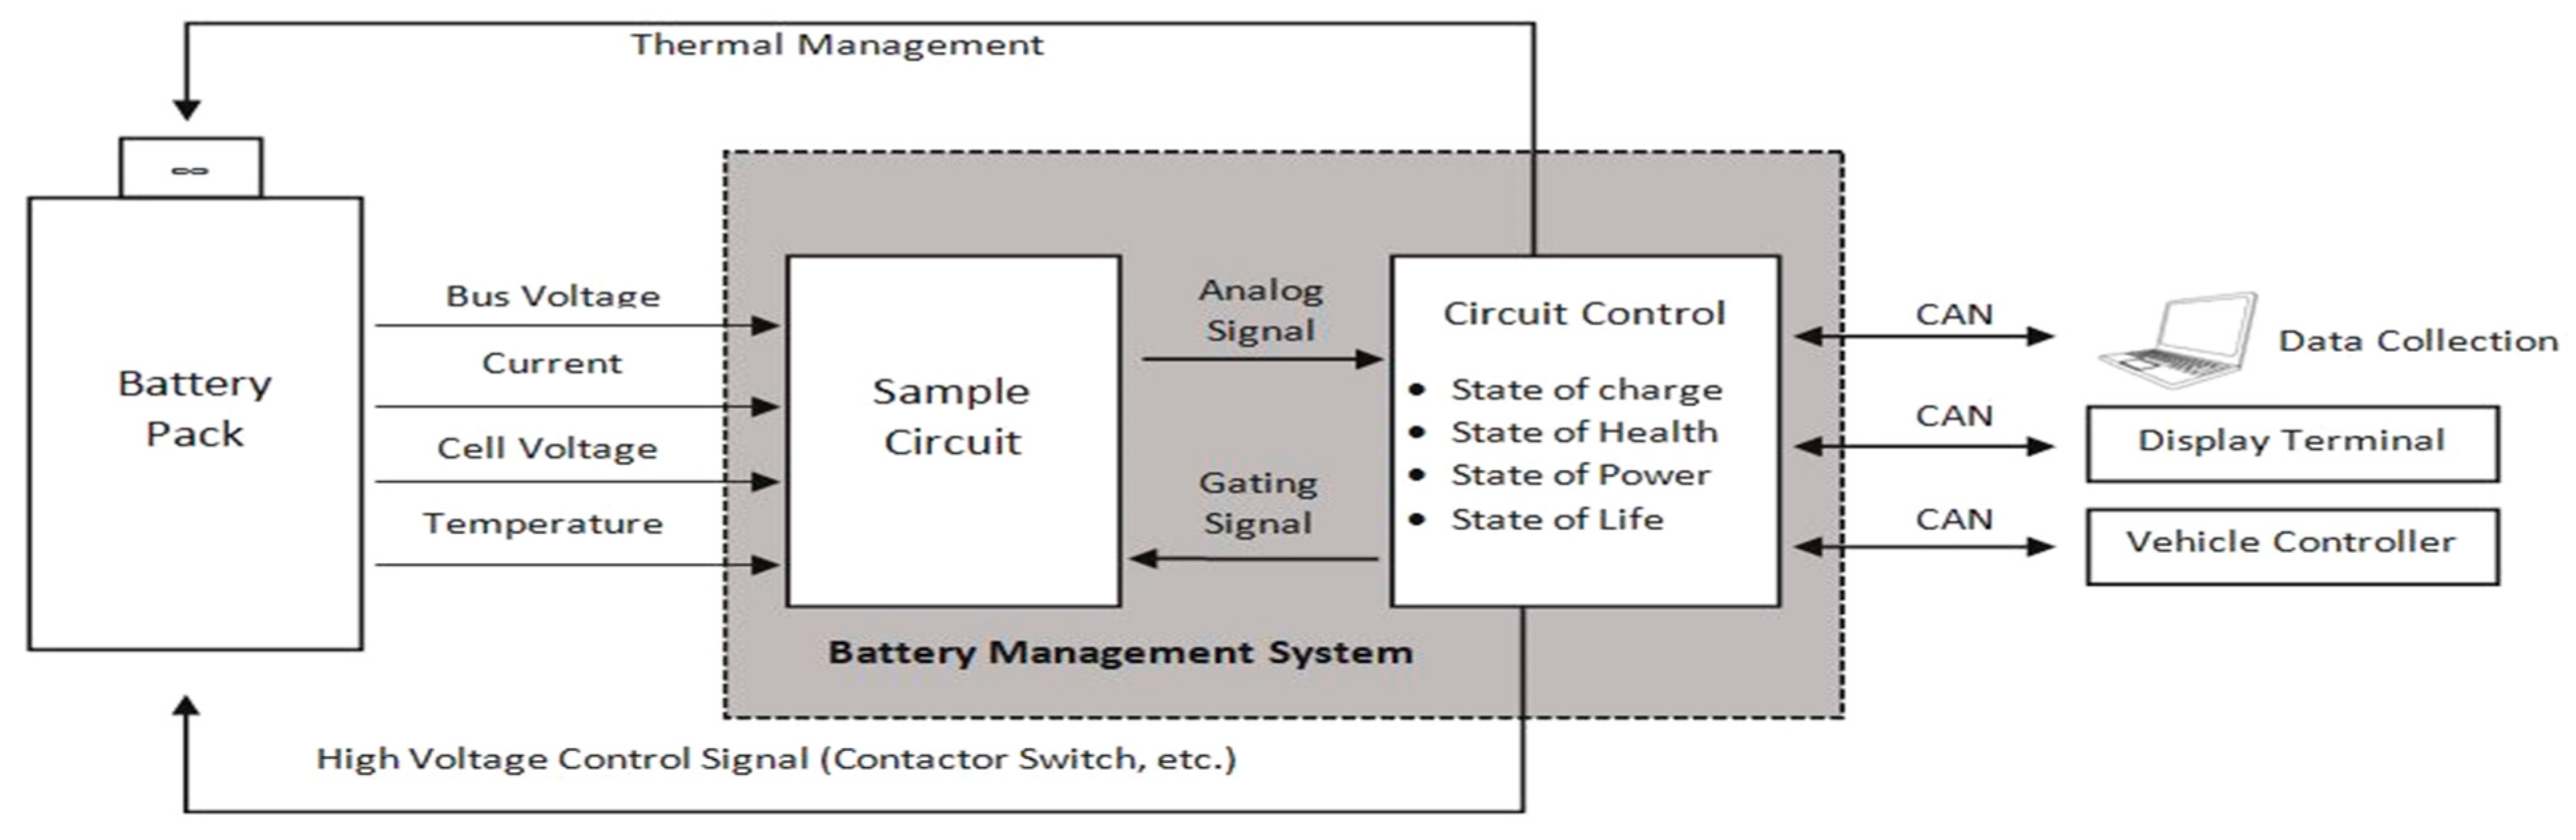 Battery Management System for Electric Vehicles Attron Automotive